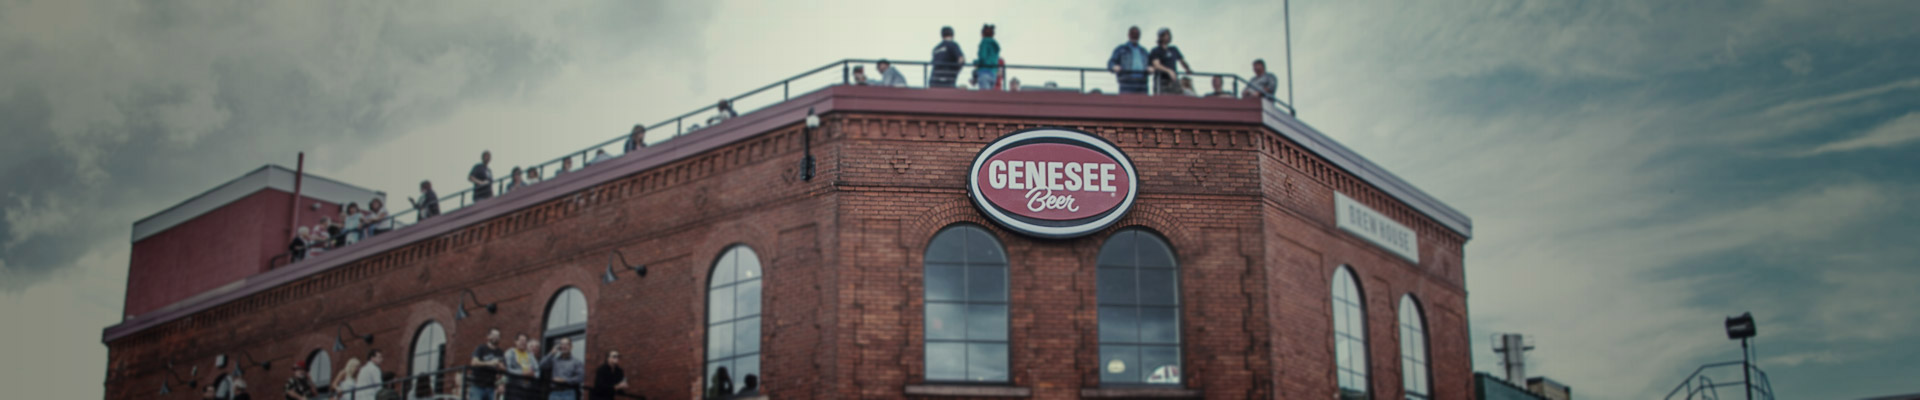 Genesee Brew House sign